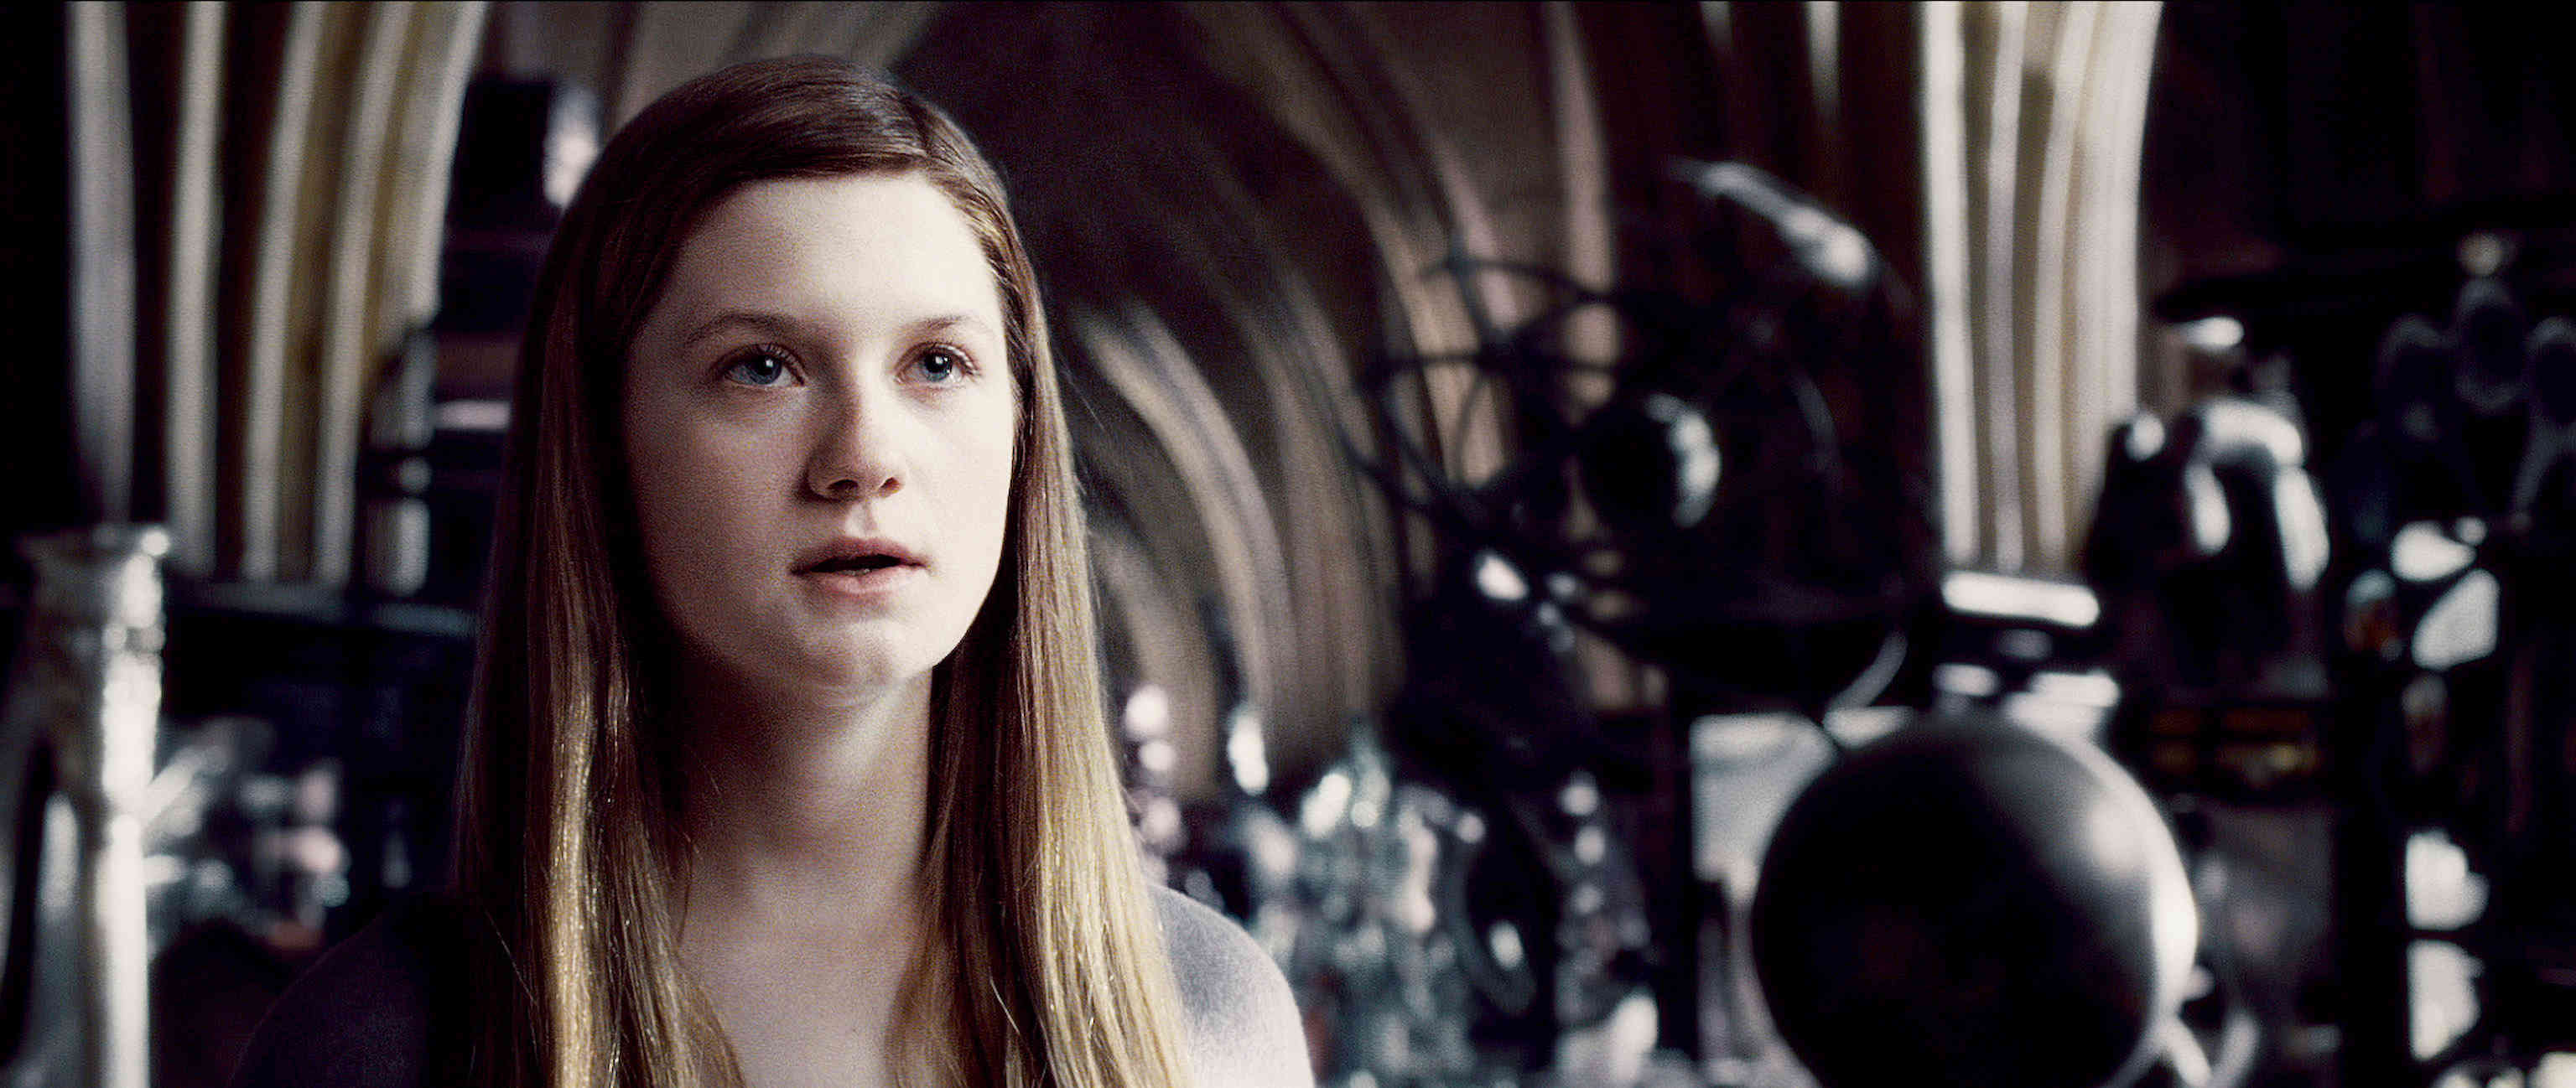 Bonnie Wright stars as Ginny Weasley in Warner Bros Pictures' Harry Potter and the Half-Blood Prince (2009)